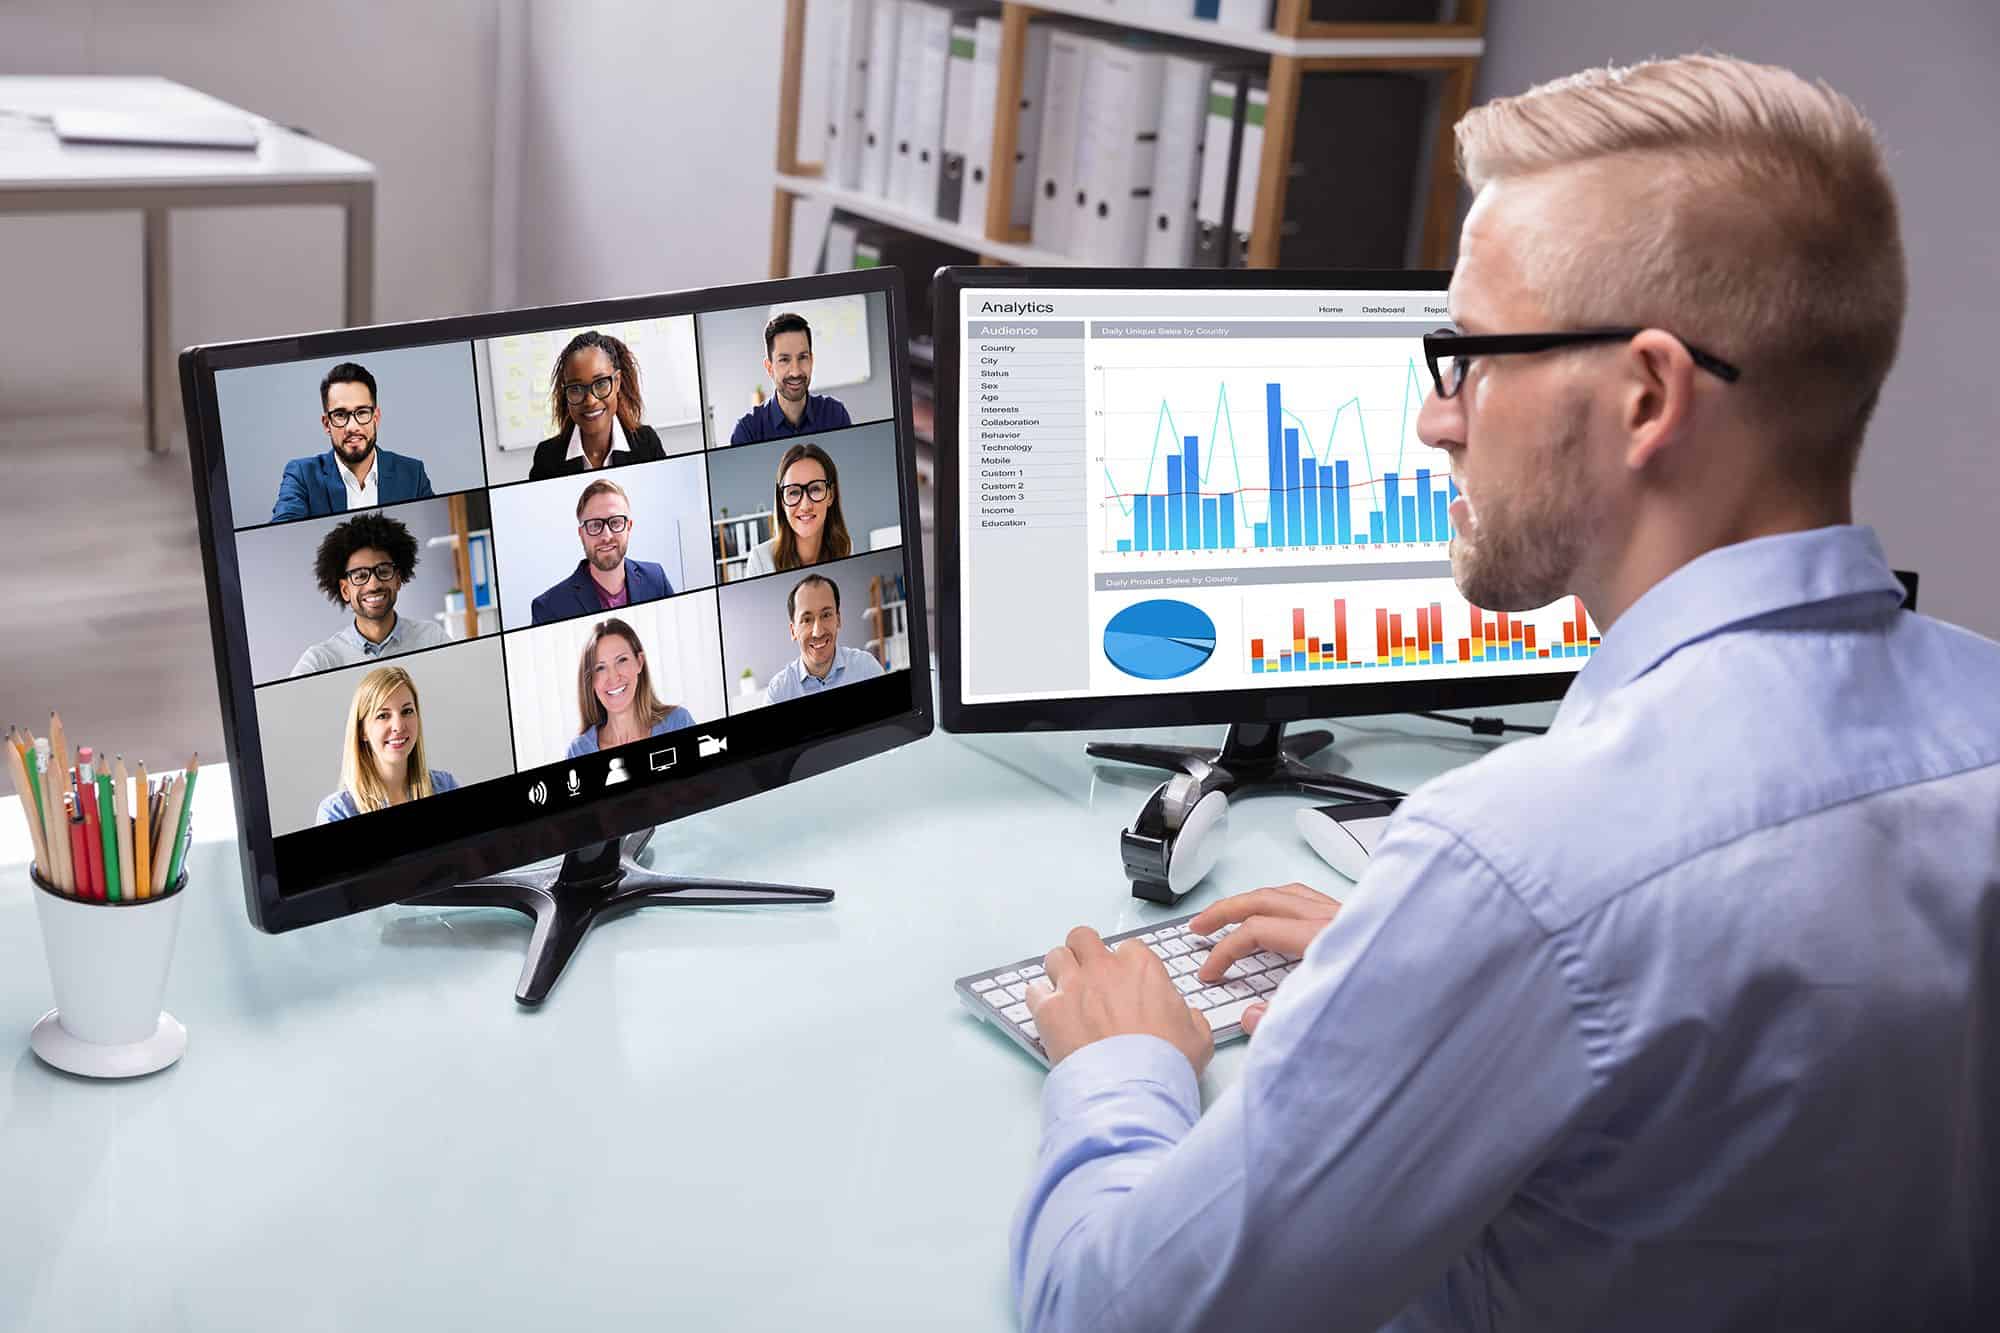 unified communications meeting solutions showing socially distanced staff